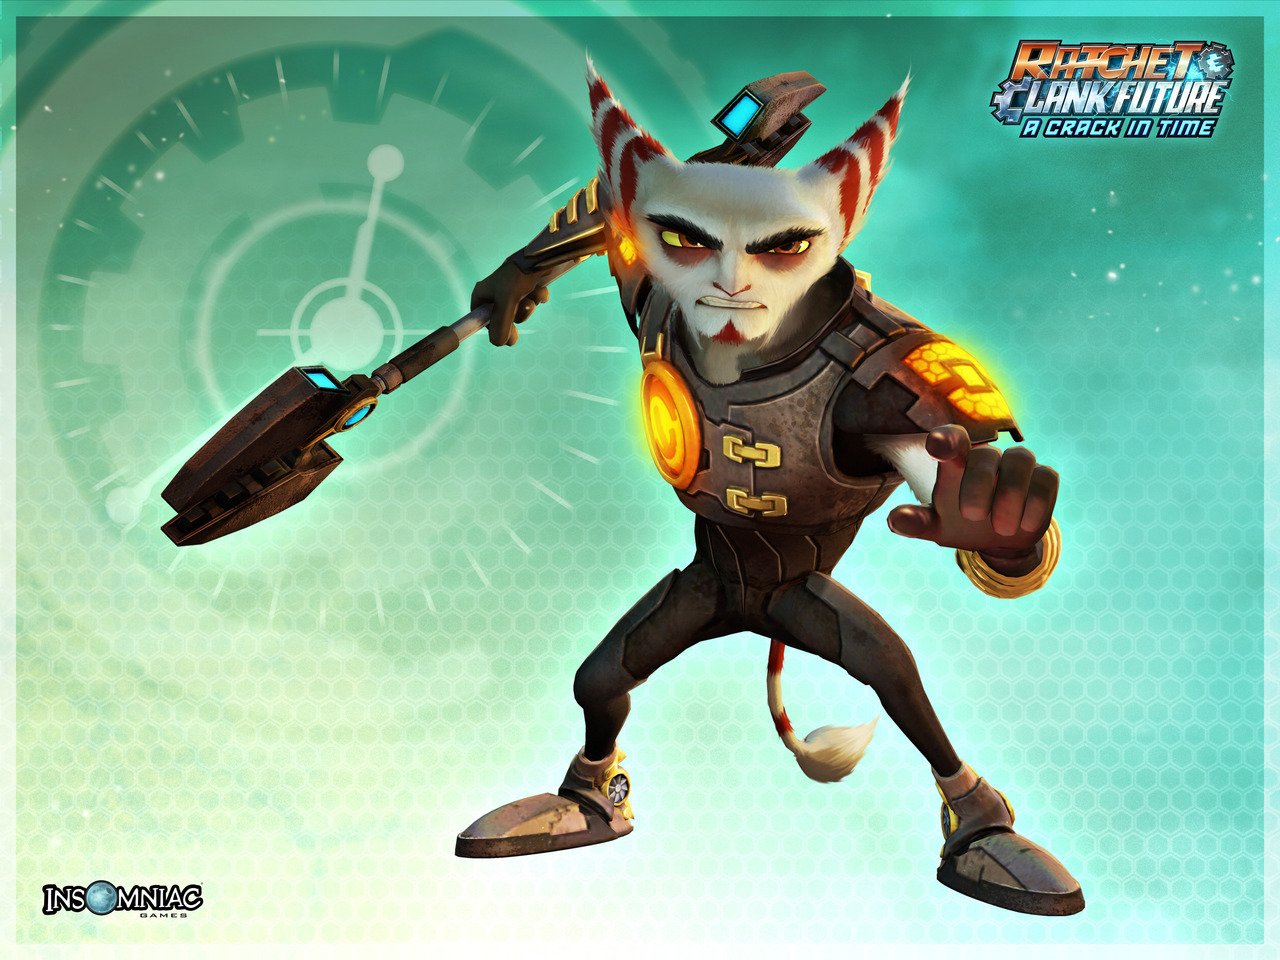 http://image.jeuxvideo.com/images/p3/r/a/ratchet-clank-a-crack-in-time-playstation-3-ps3-026.jpg